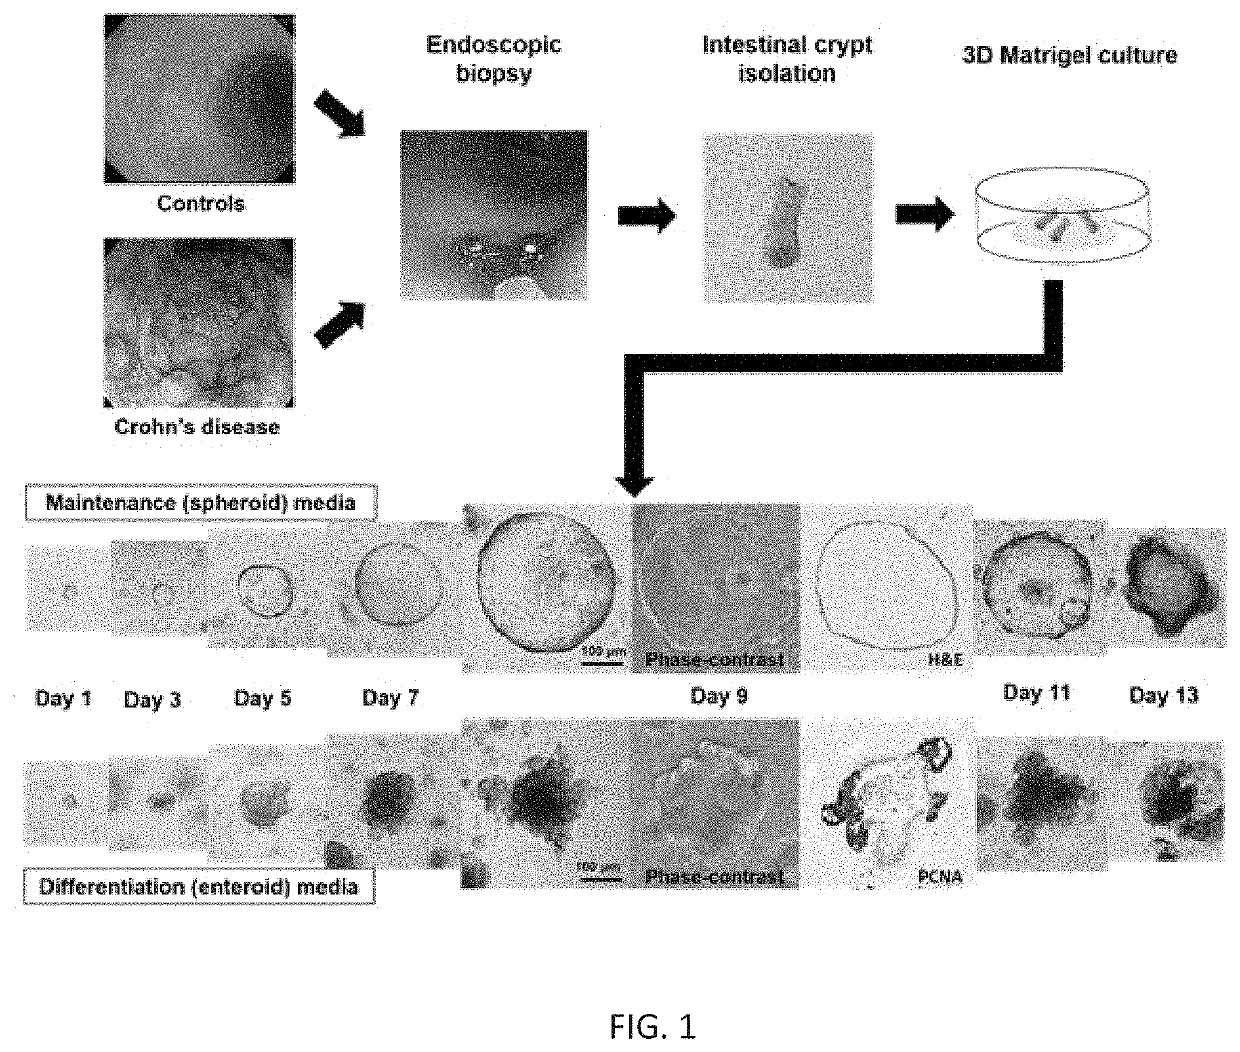 Pharmaceutical composition for preventing or treating inflammatory bowel disease comprising Tumor necrosis factor alpha inhibitor and Prostaglandin E2